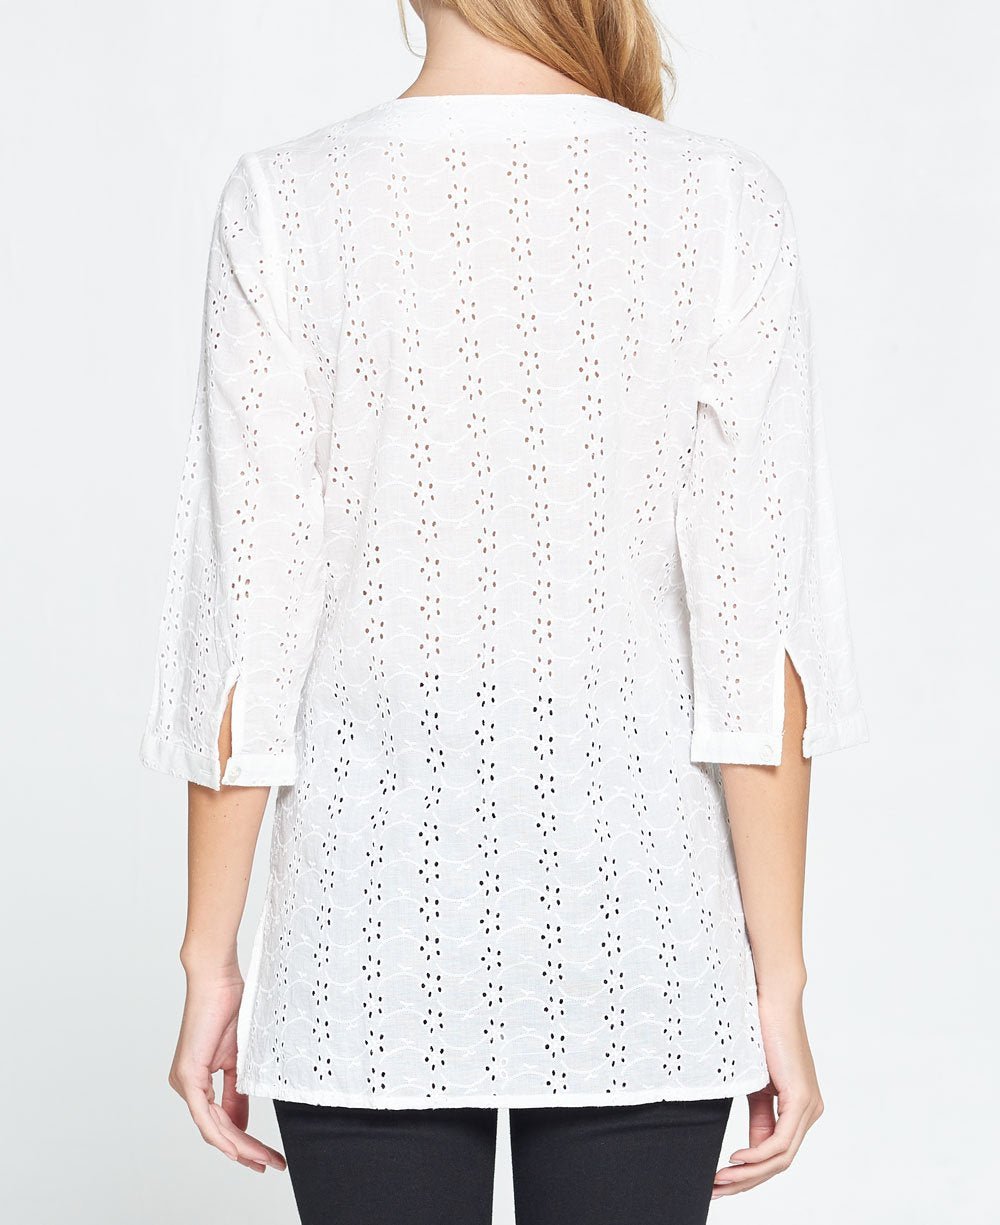 Embroidered Eyelet White Cotton Tunic Top - Shirts & Tops S